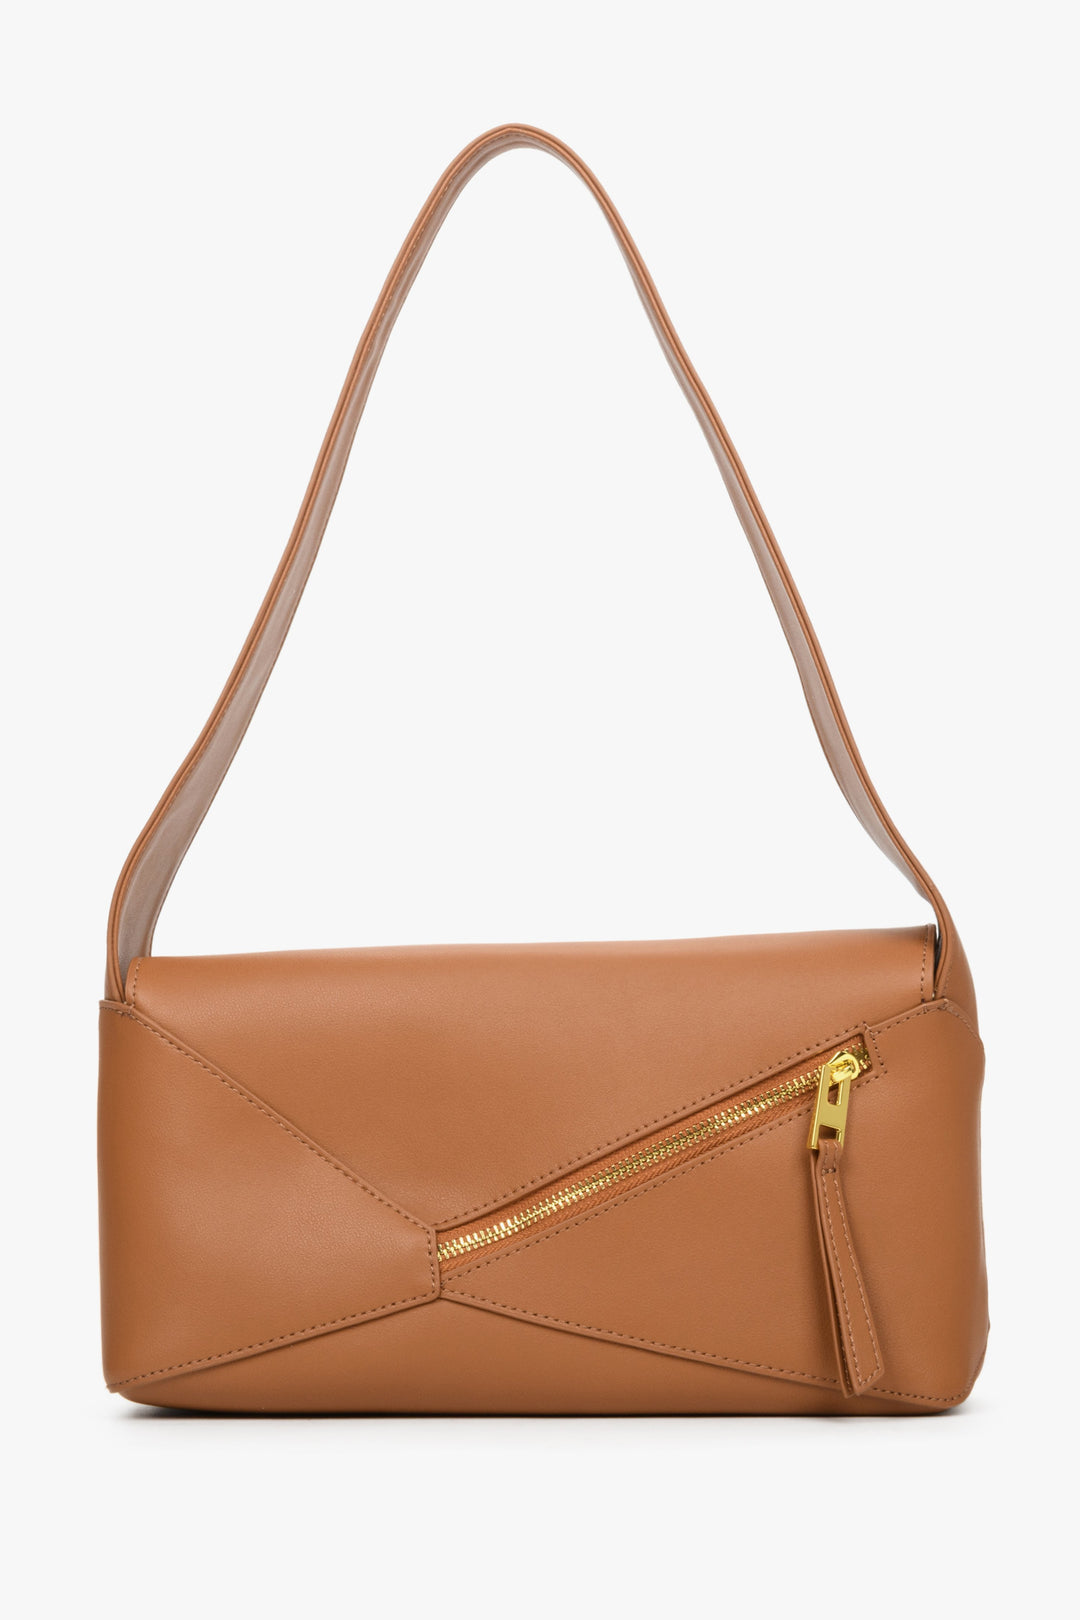 Women's brown handbag made of genuine leather by Estro - front view presentation.